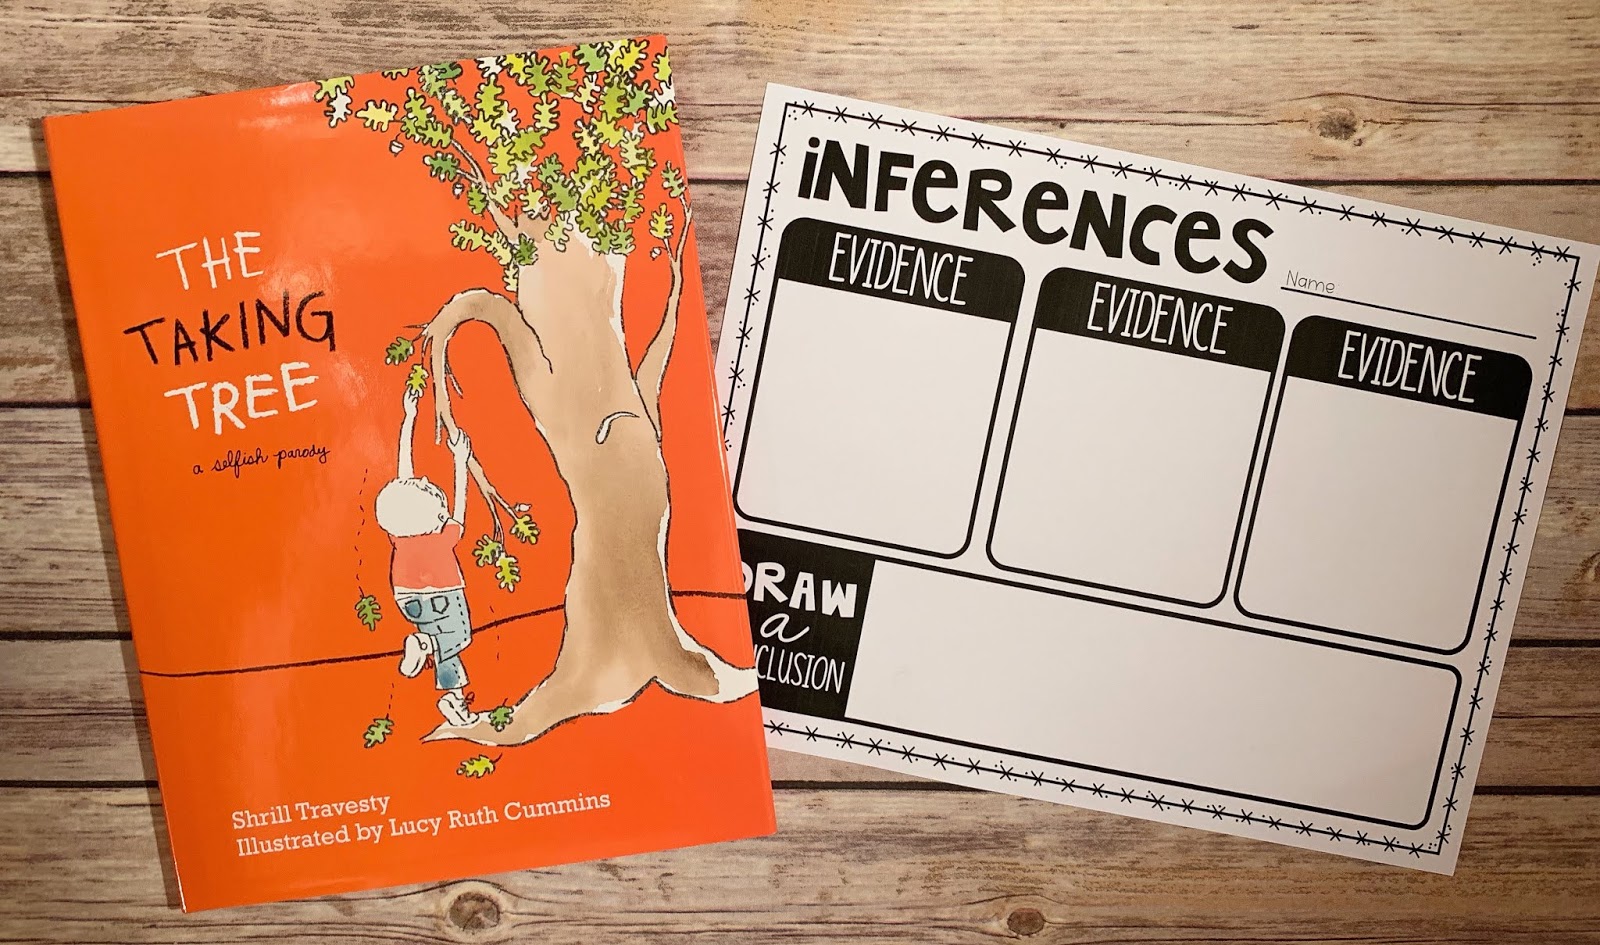 Mentor text with the text "The Taking Tree" and graphic organizer with text "inferences"